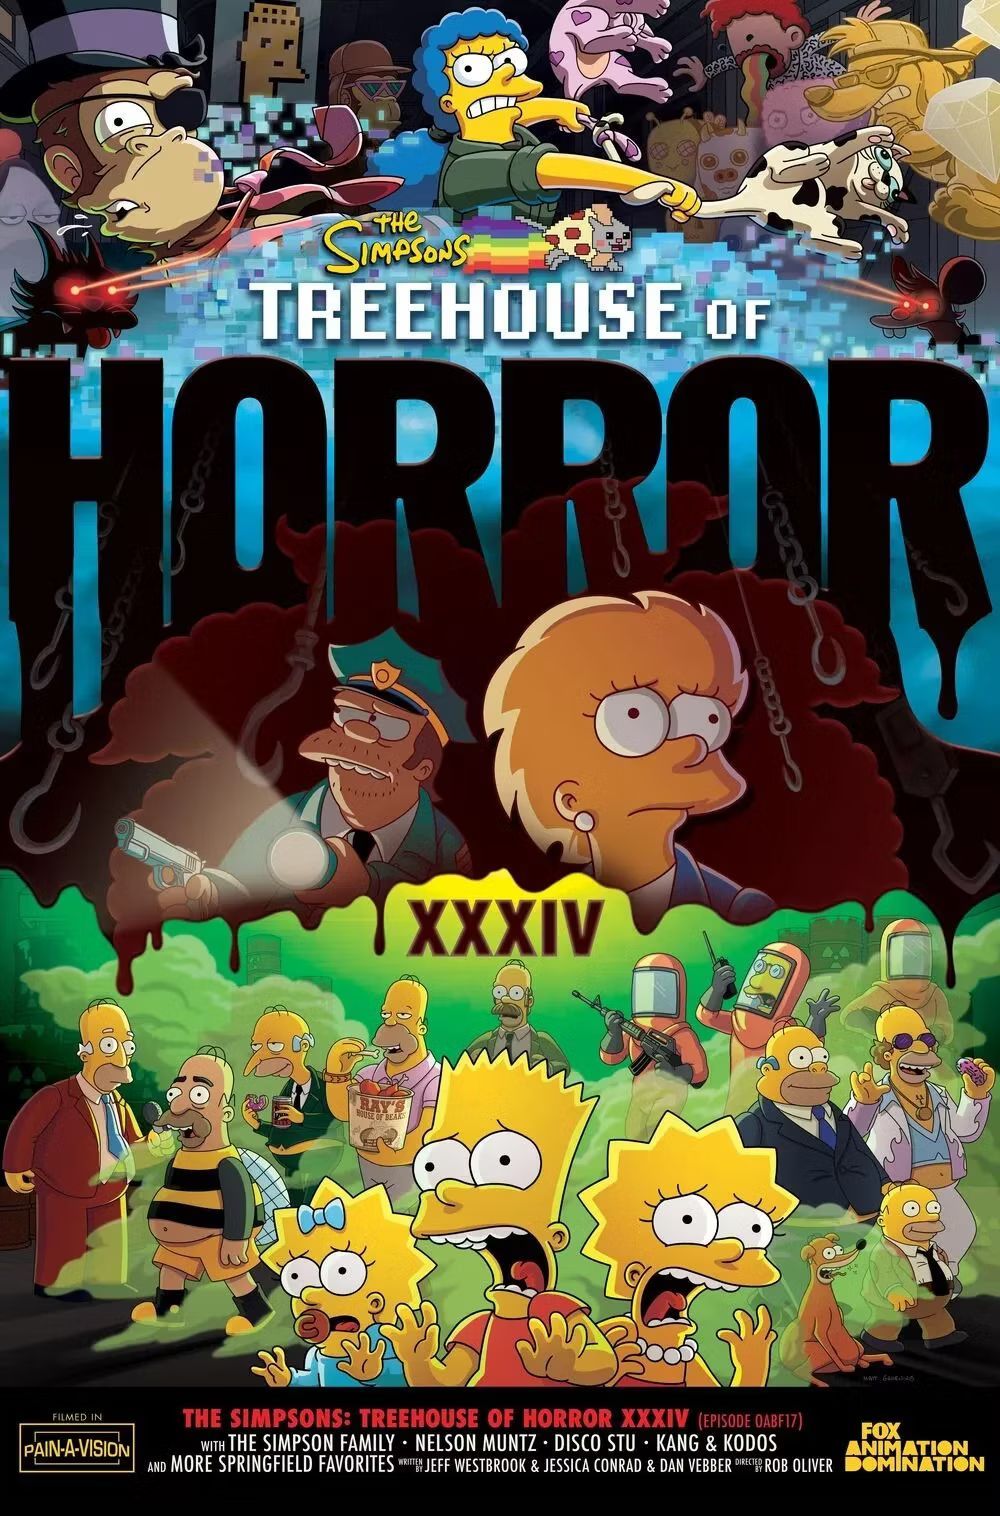 The Simpsons’ Treehouse Of Horror 34 Poster Unveils Spooky Surprises In Springfield By Bringing